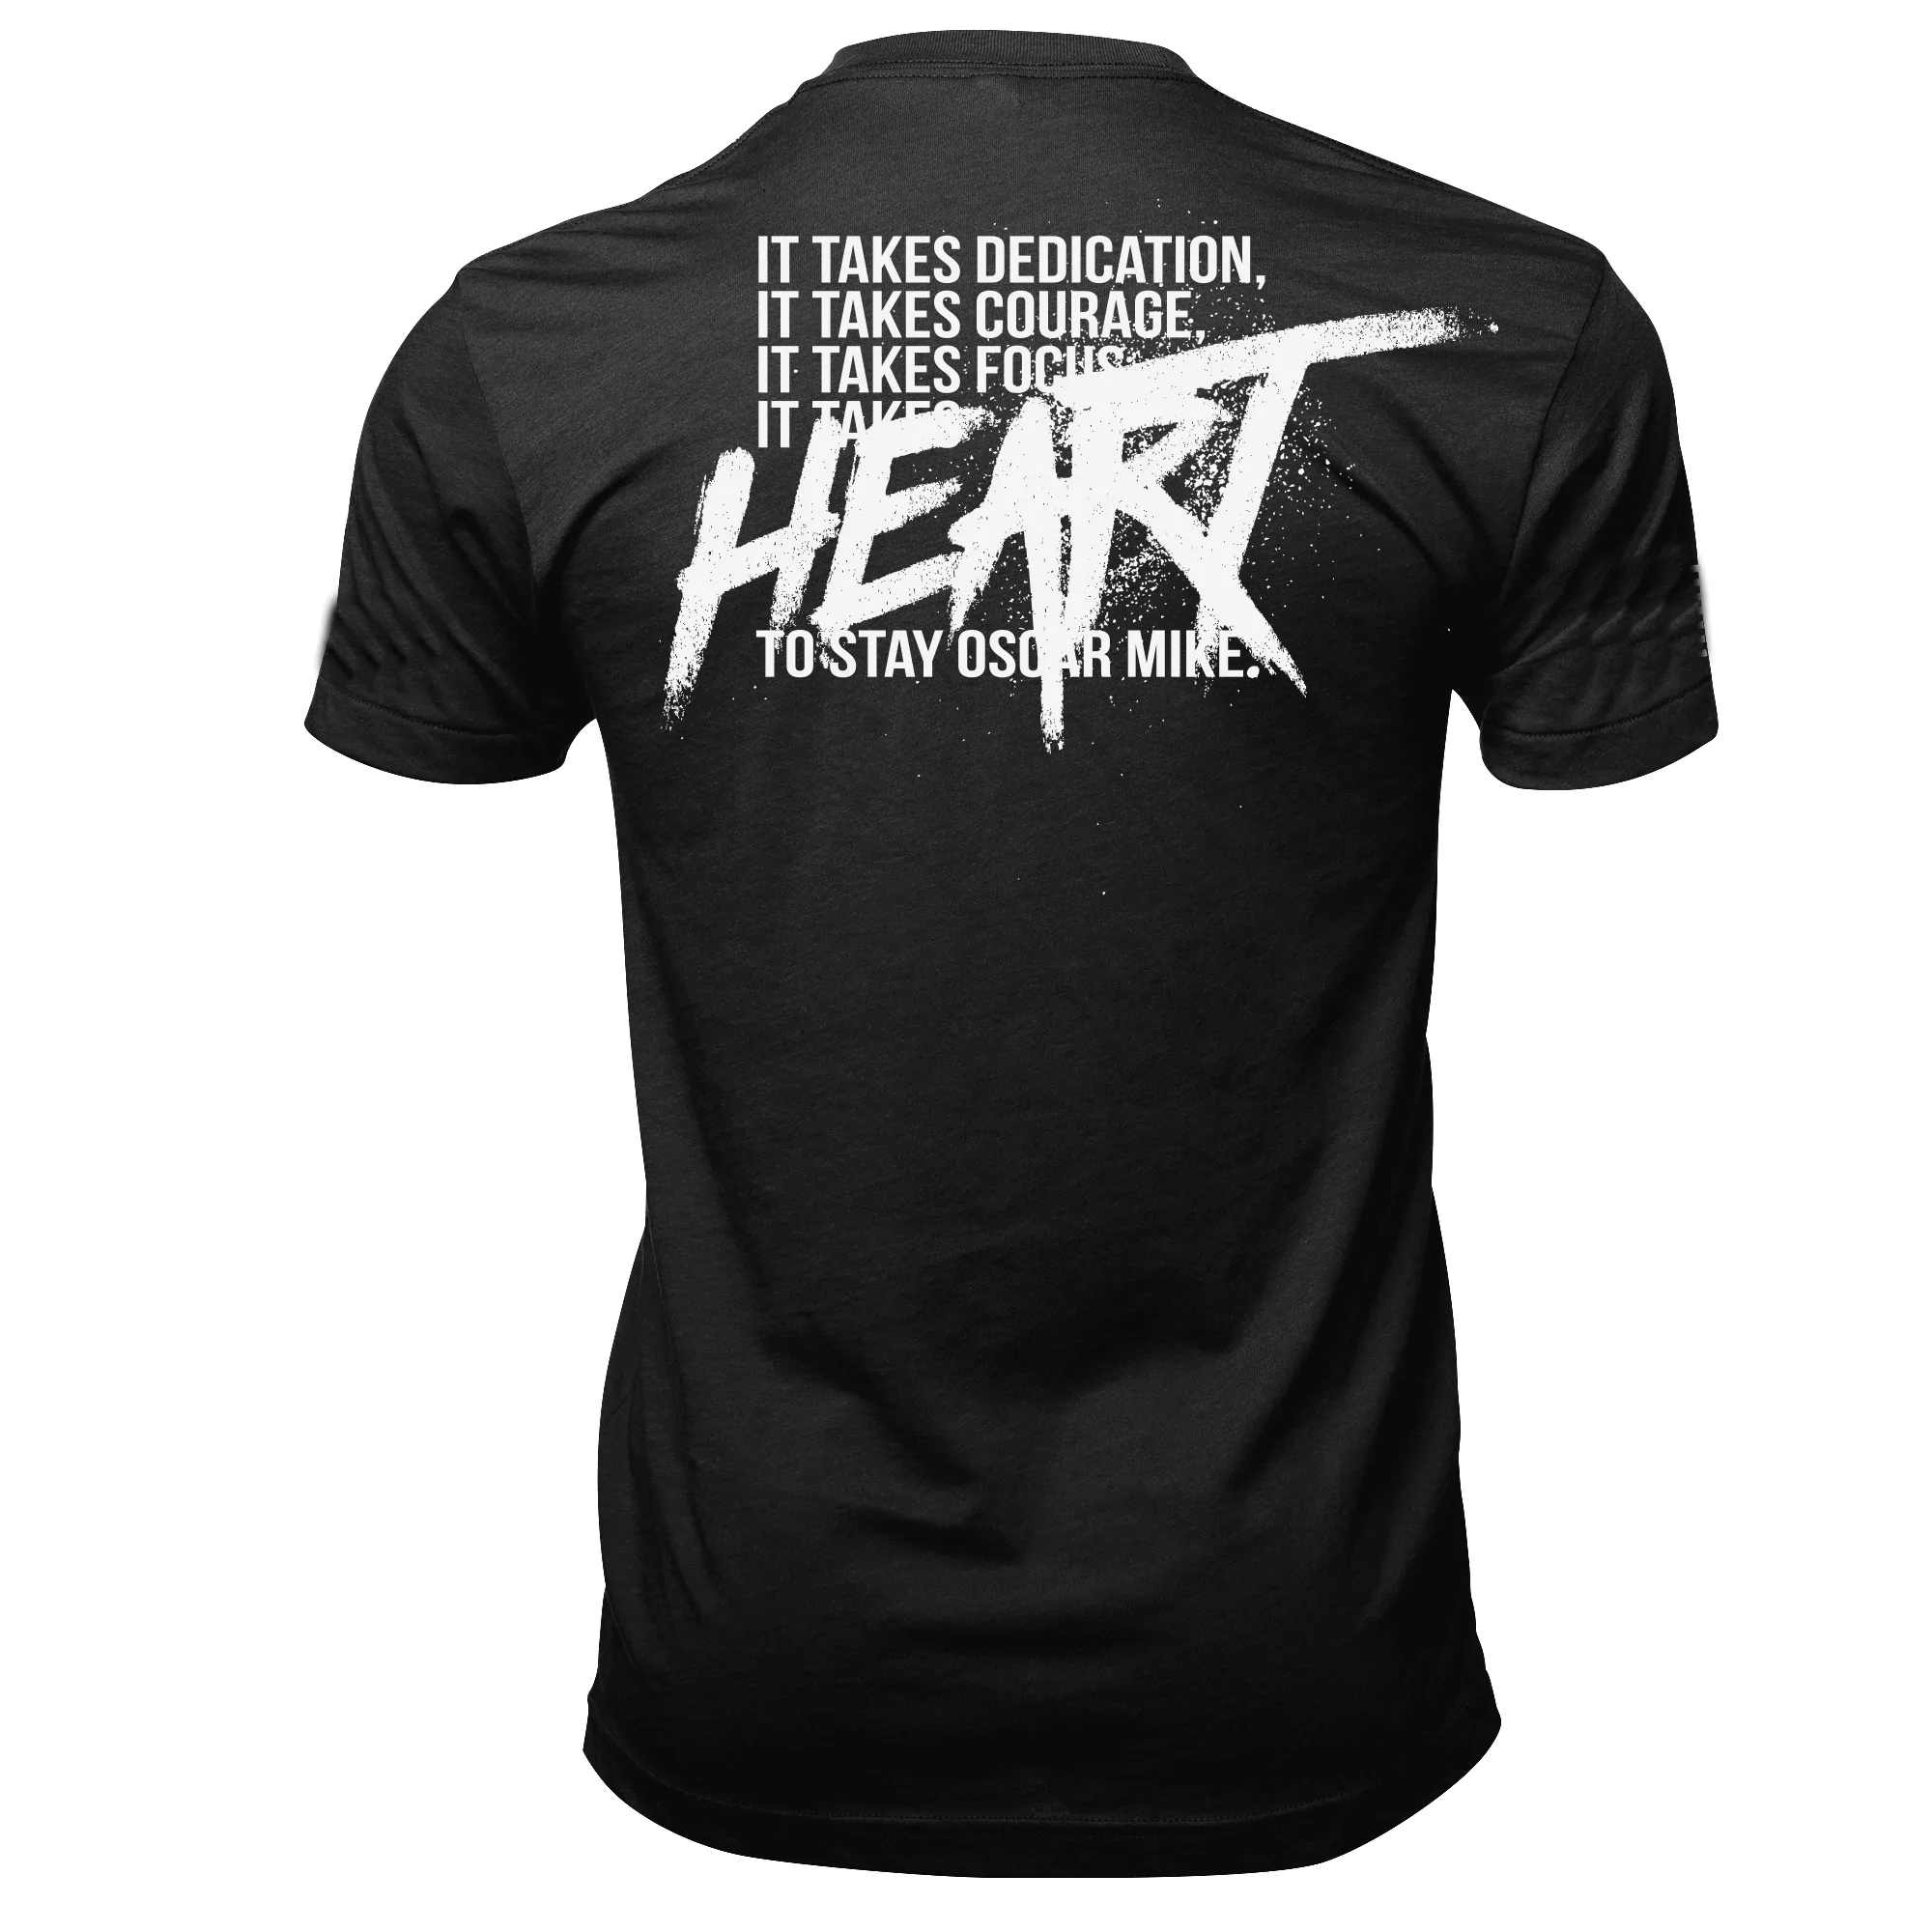 Oscar Mike Men's Heart Tee posted by ProdOrigin USA in Men's Apparel